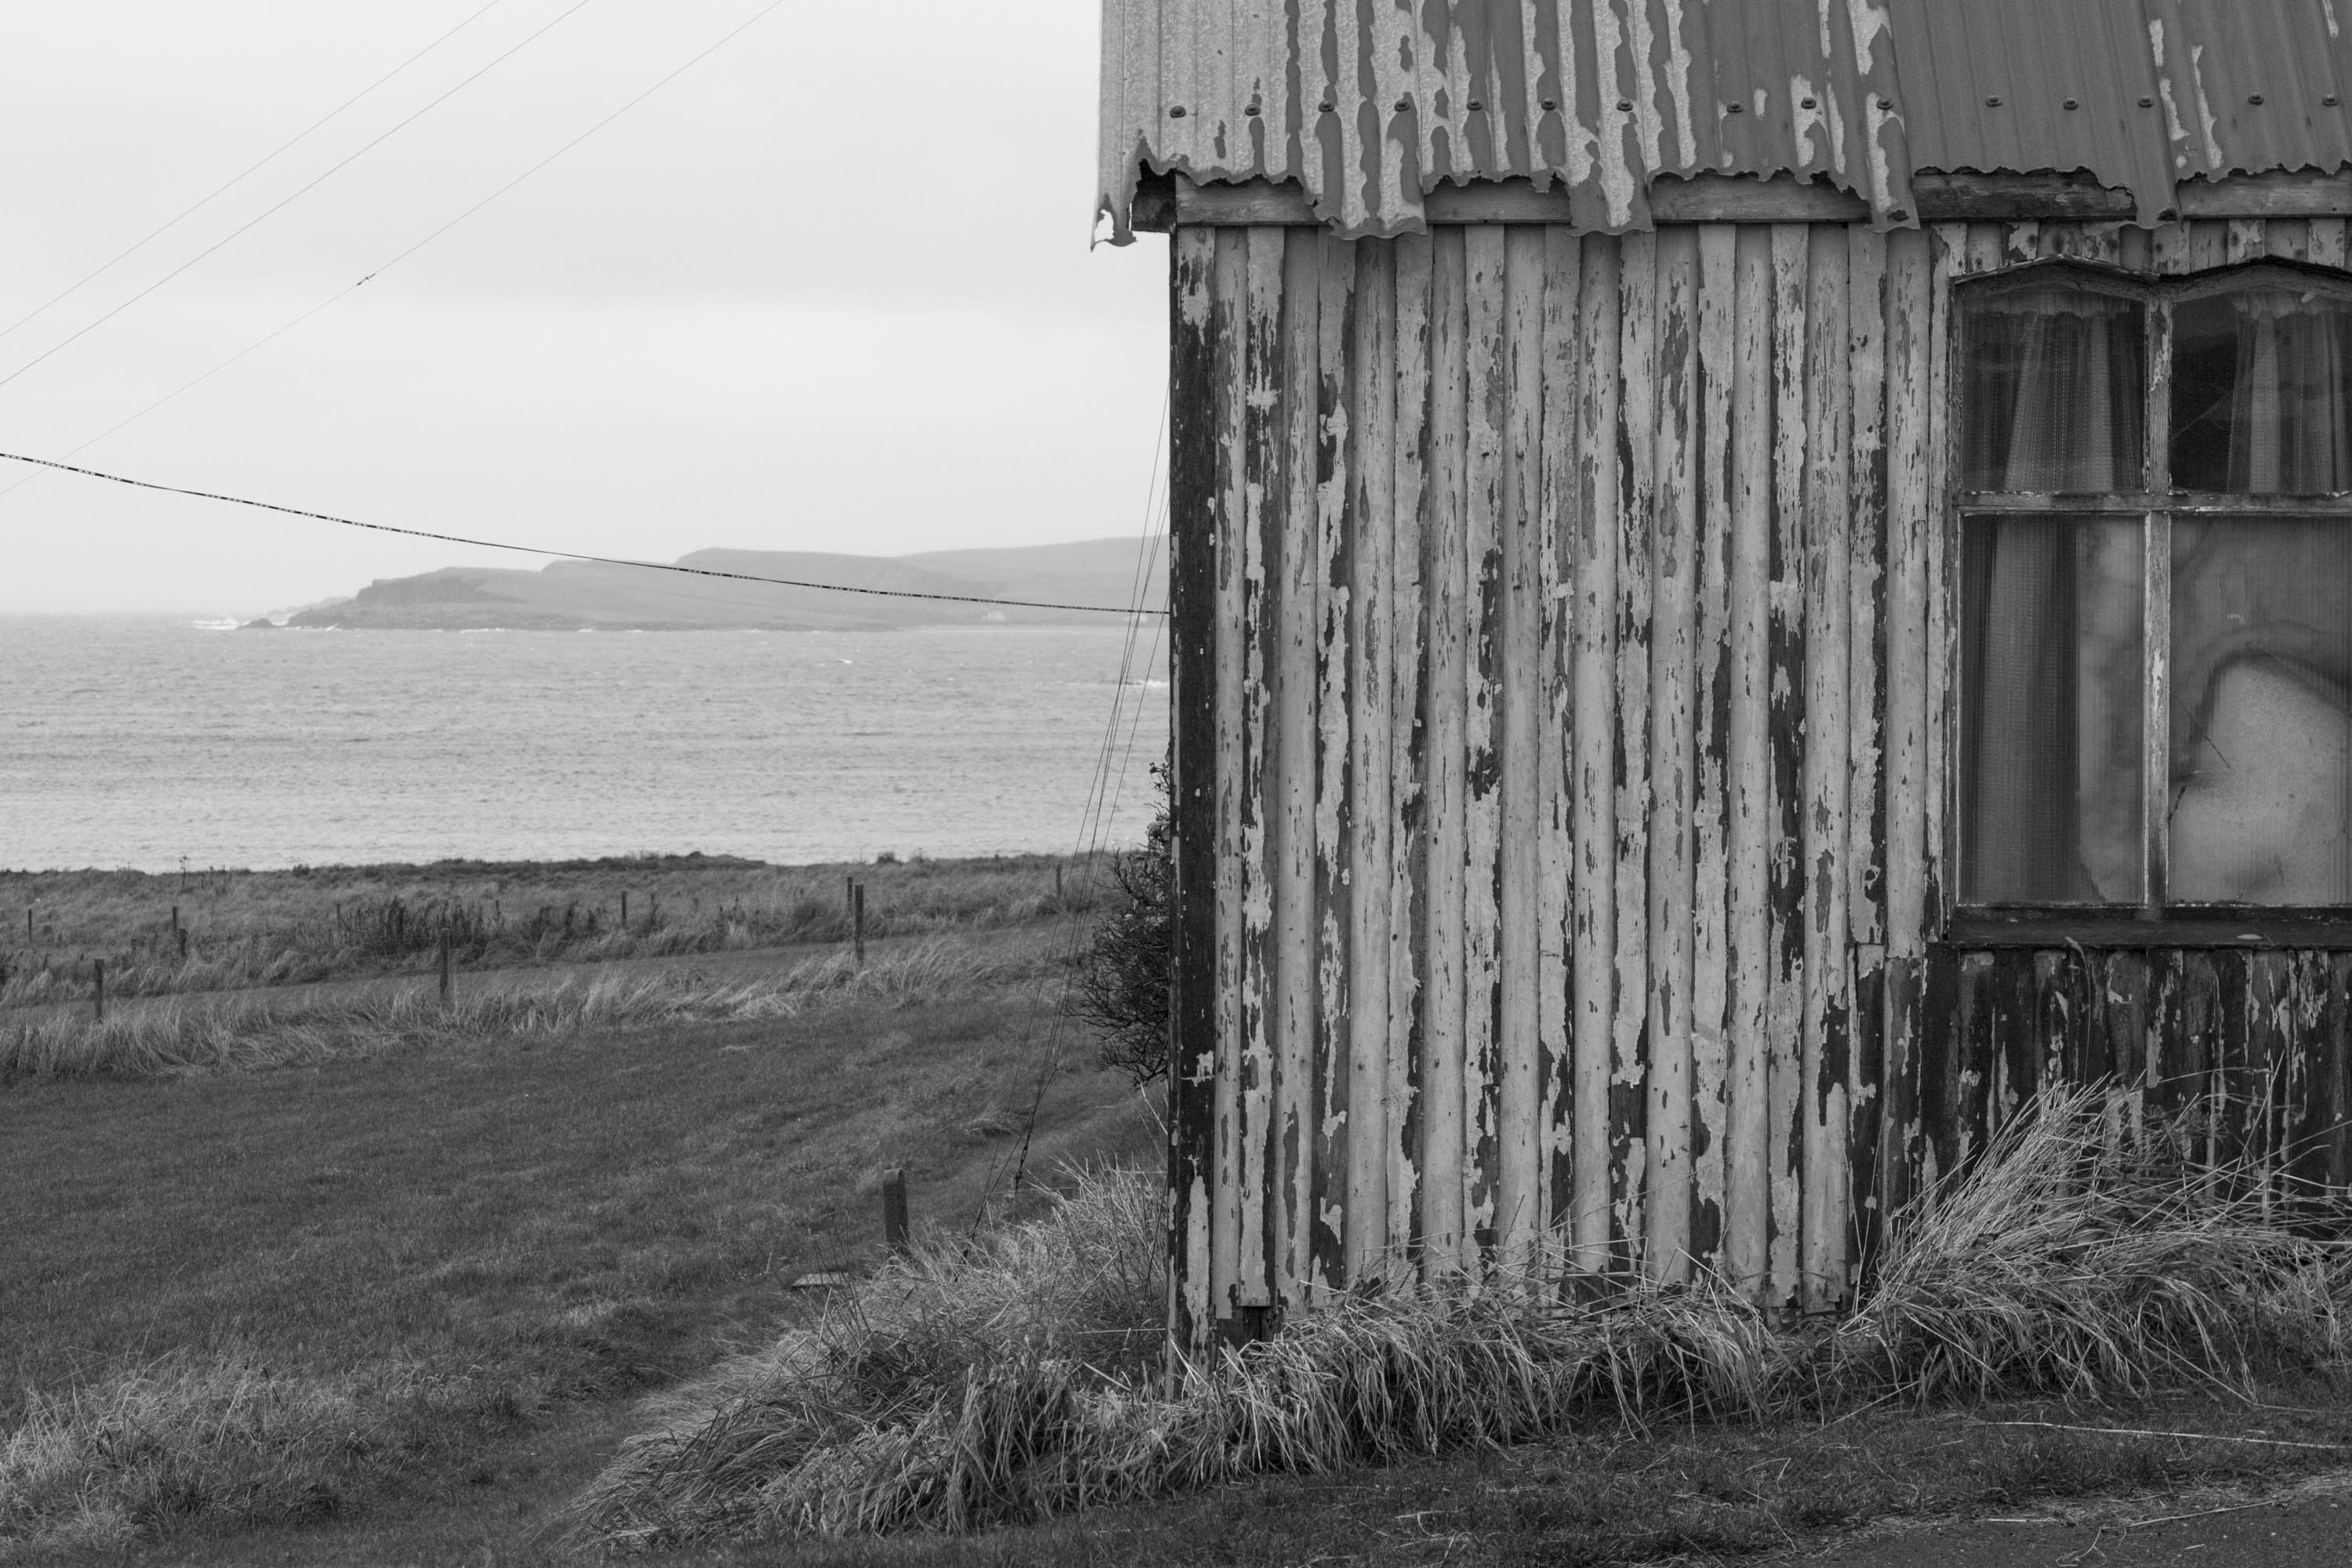 Gospel Hall in Hoswick, Shetland. A small, old wooden building with a corrugated tin roof. The tin is worn, with a jagged edge. Behind a view to the sea and Levenwick